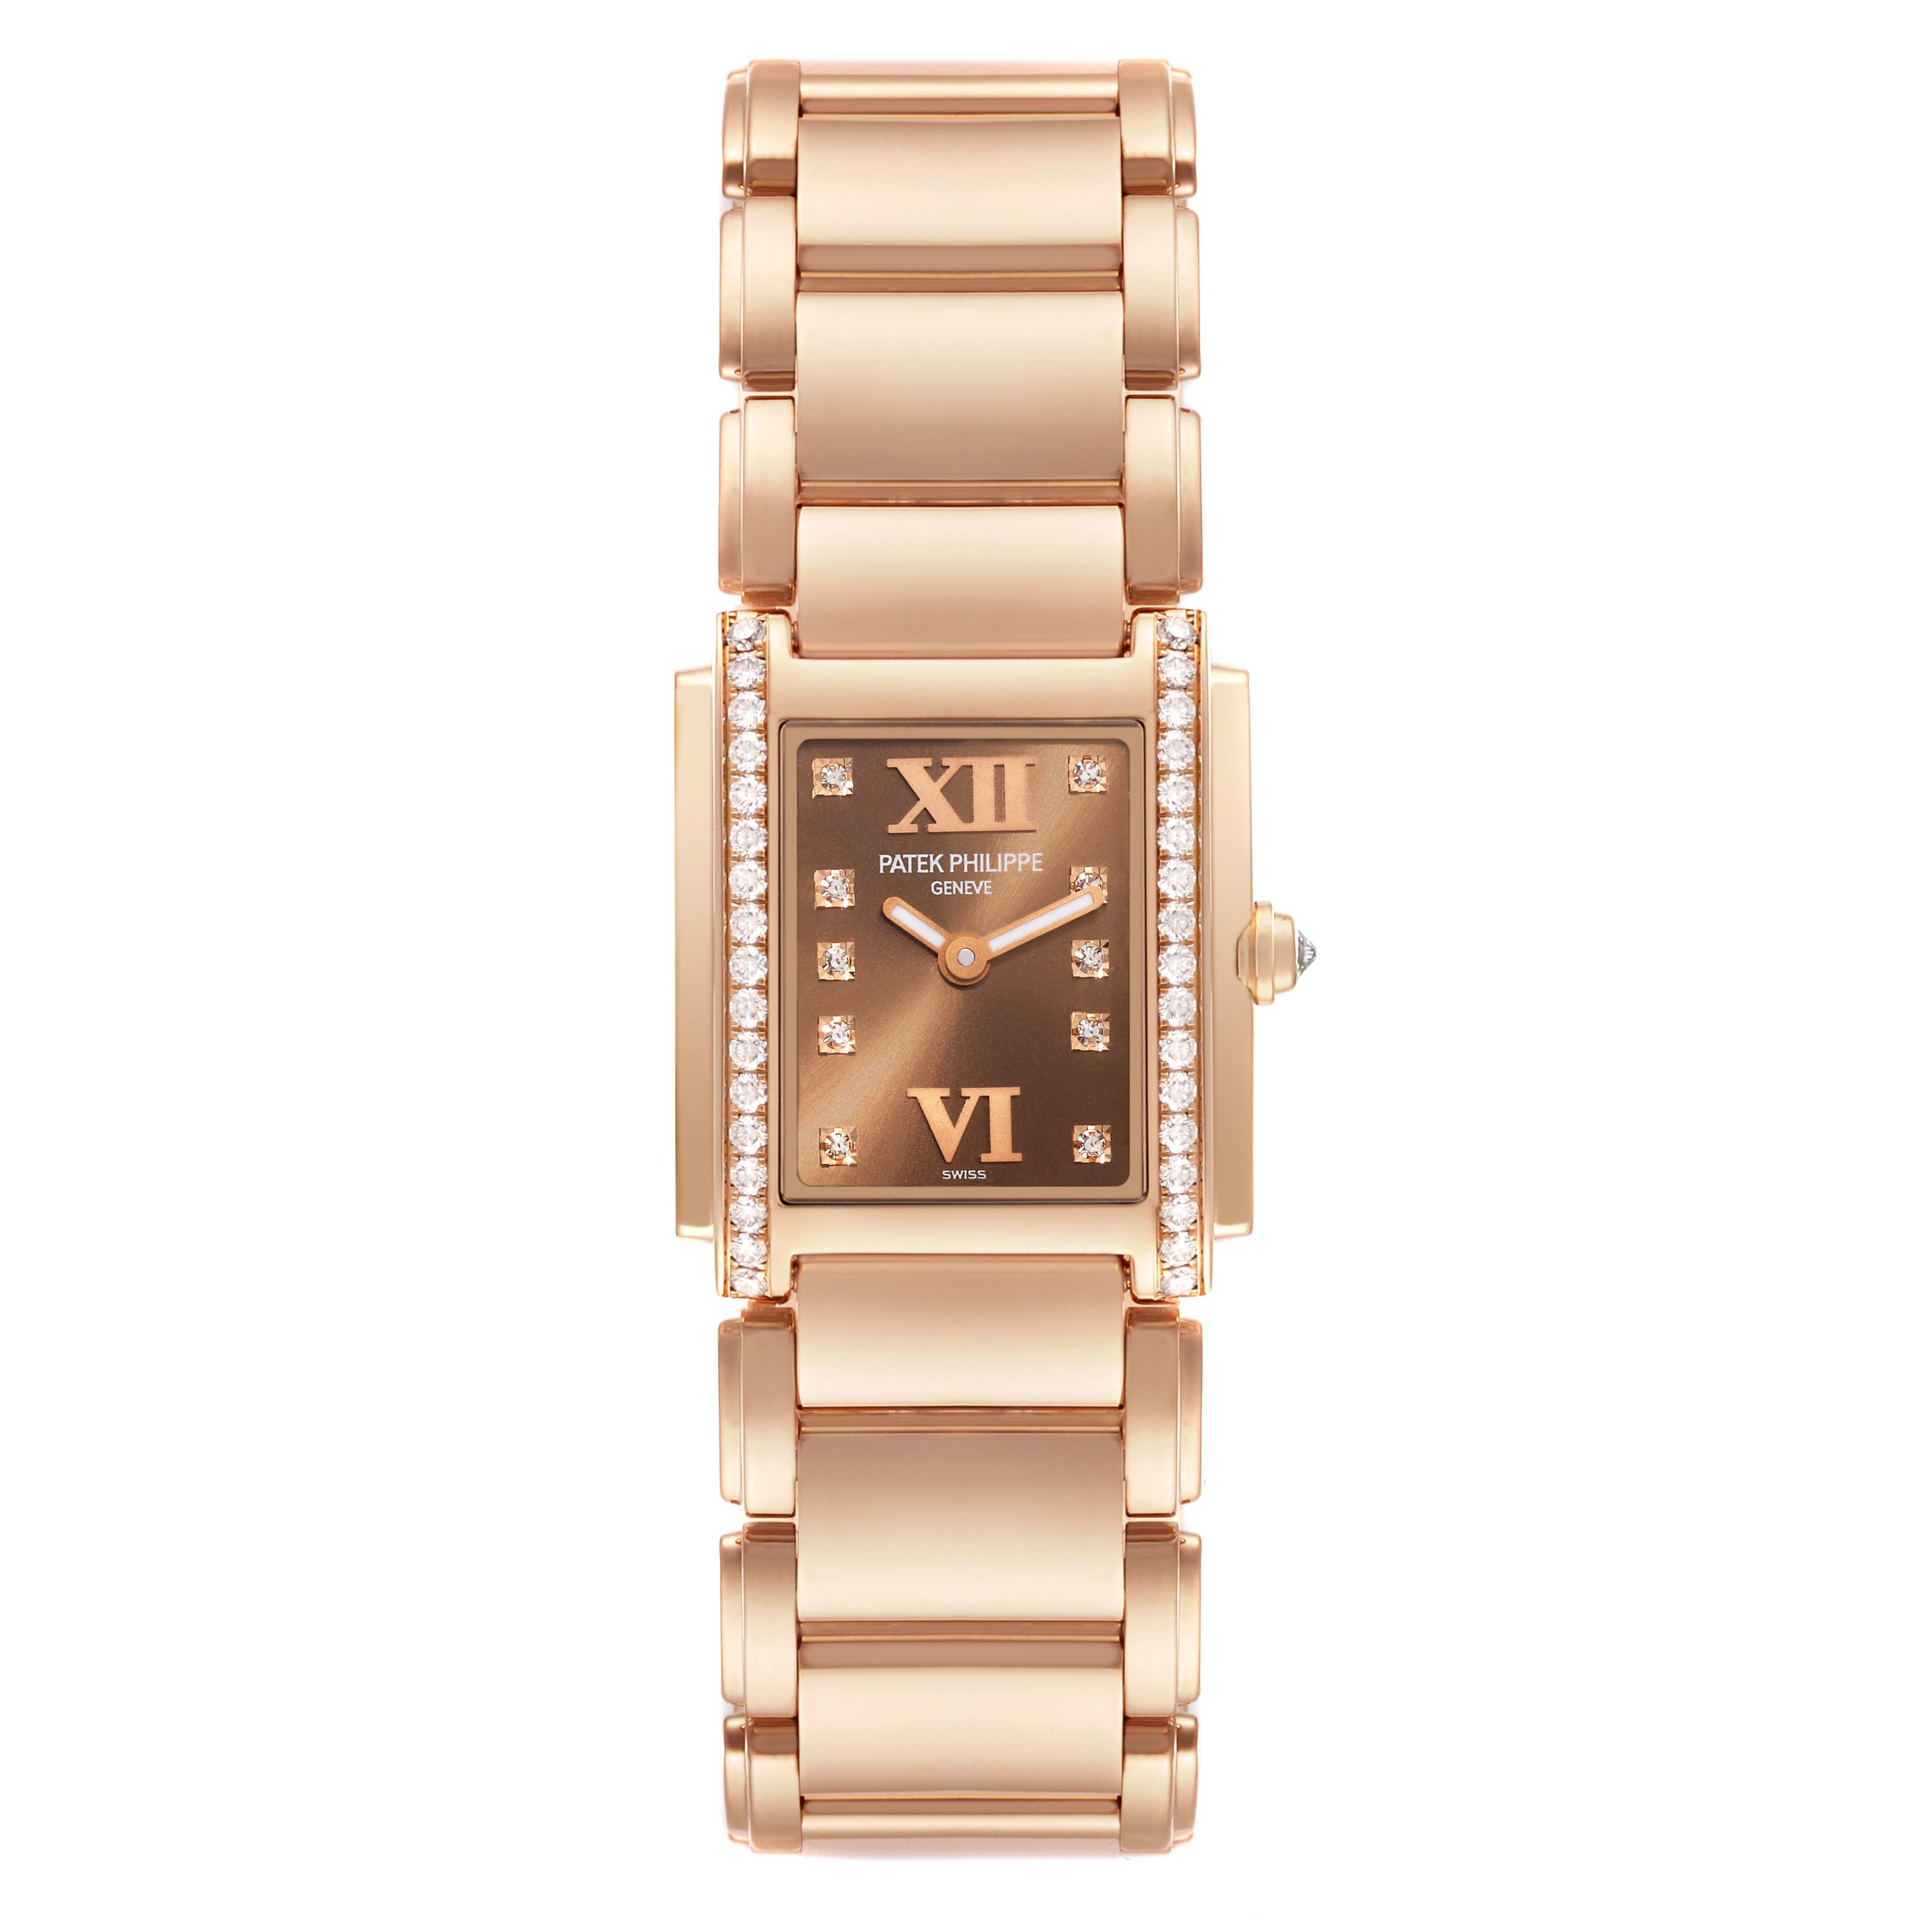 Patek Philippe Twenty-4 Small 18K Rose Gold Diamond Ladies Watch 4908 Papers. Quartz movement. 18K rose gold case 22.0 x 26.3 mm encrusted with one row of 34 Top Wesselton quality diamonds weighing approximately 0.43 carats. The crown is set with a